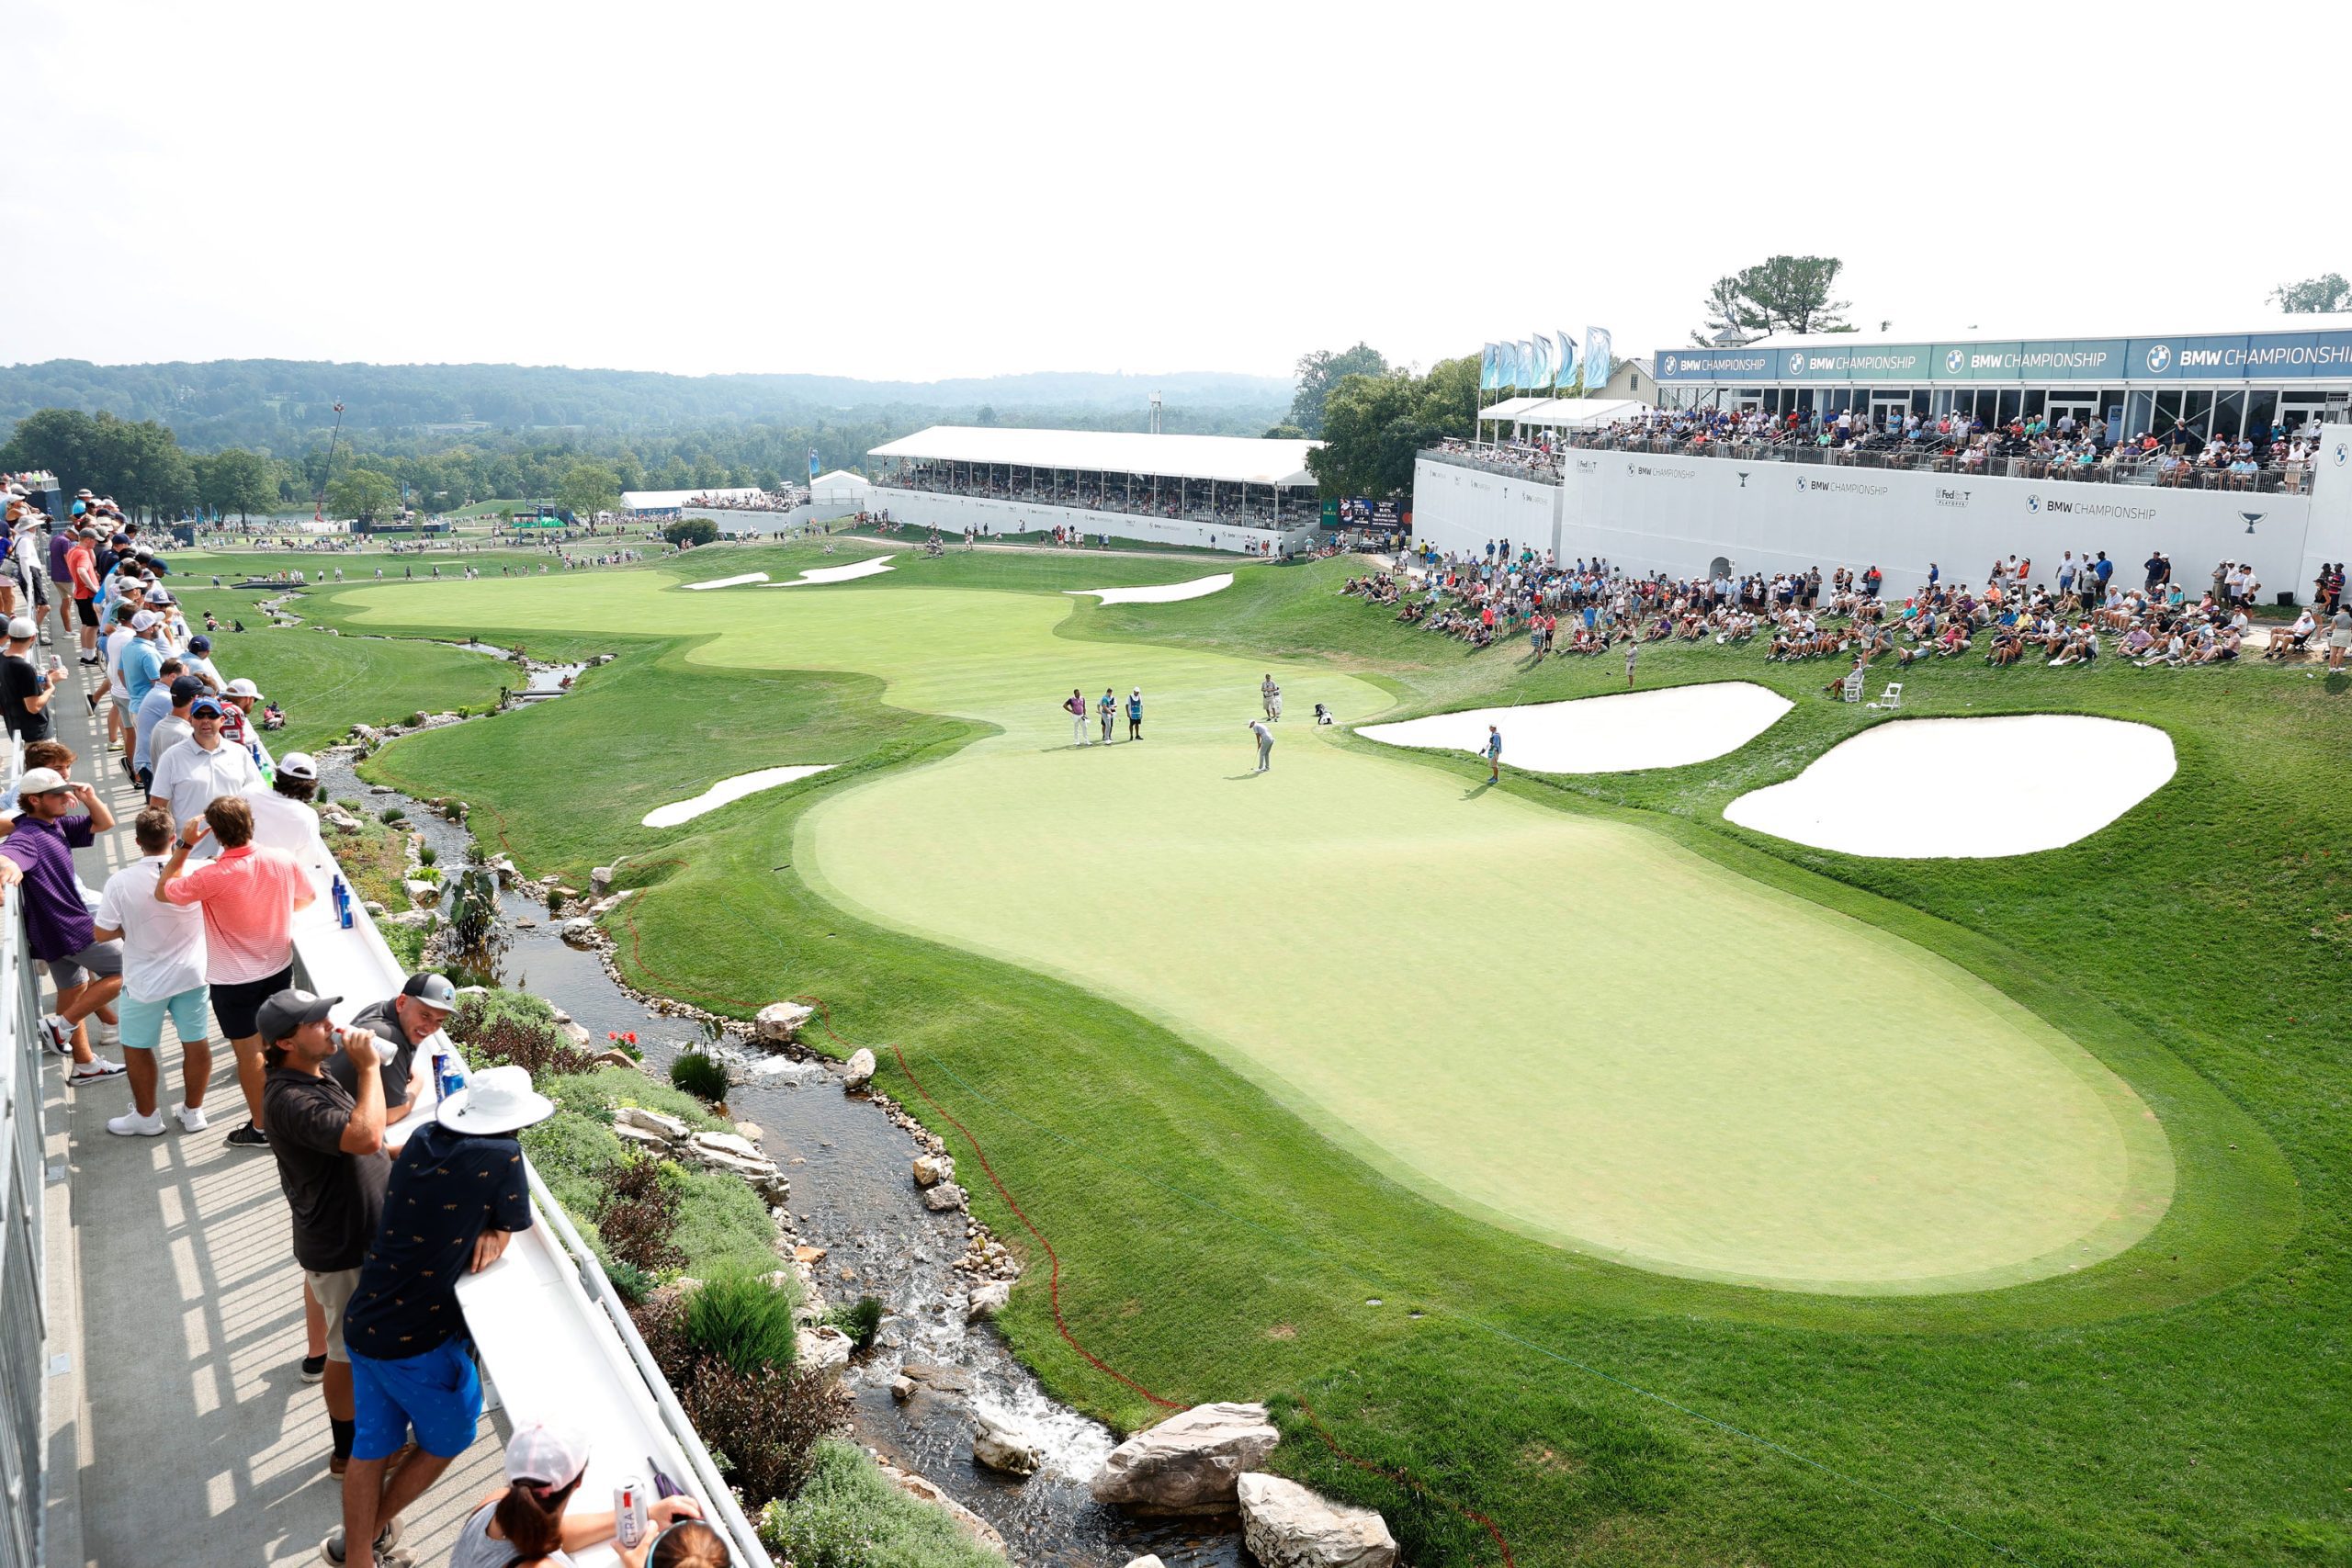 WATCH LIVE BMW Championship 2022: How to Stream PGA Tour Golf on TV, Radio & Other Devices